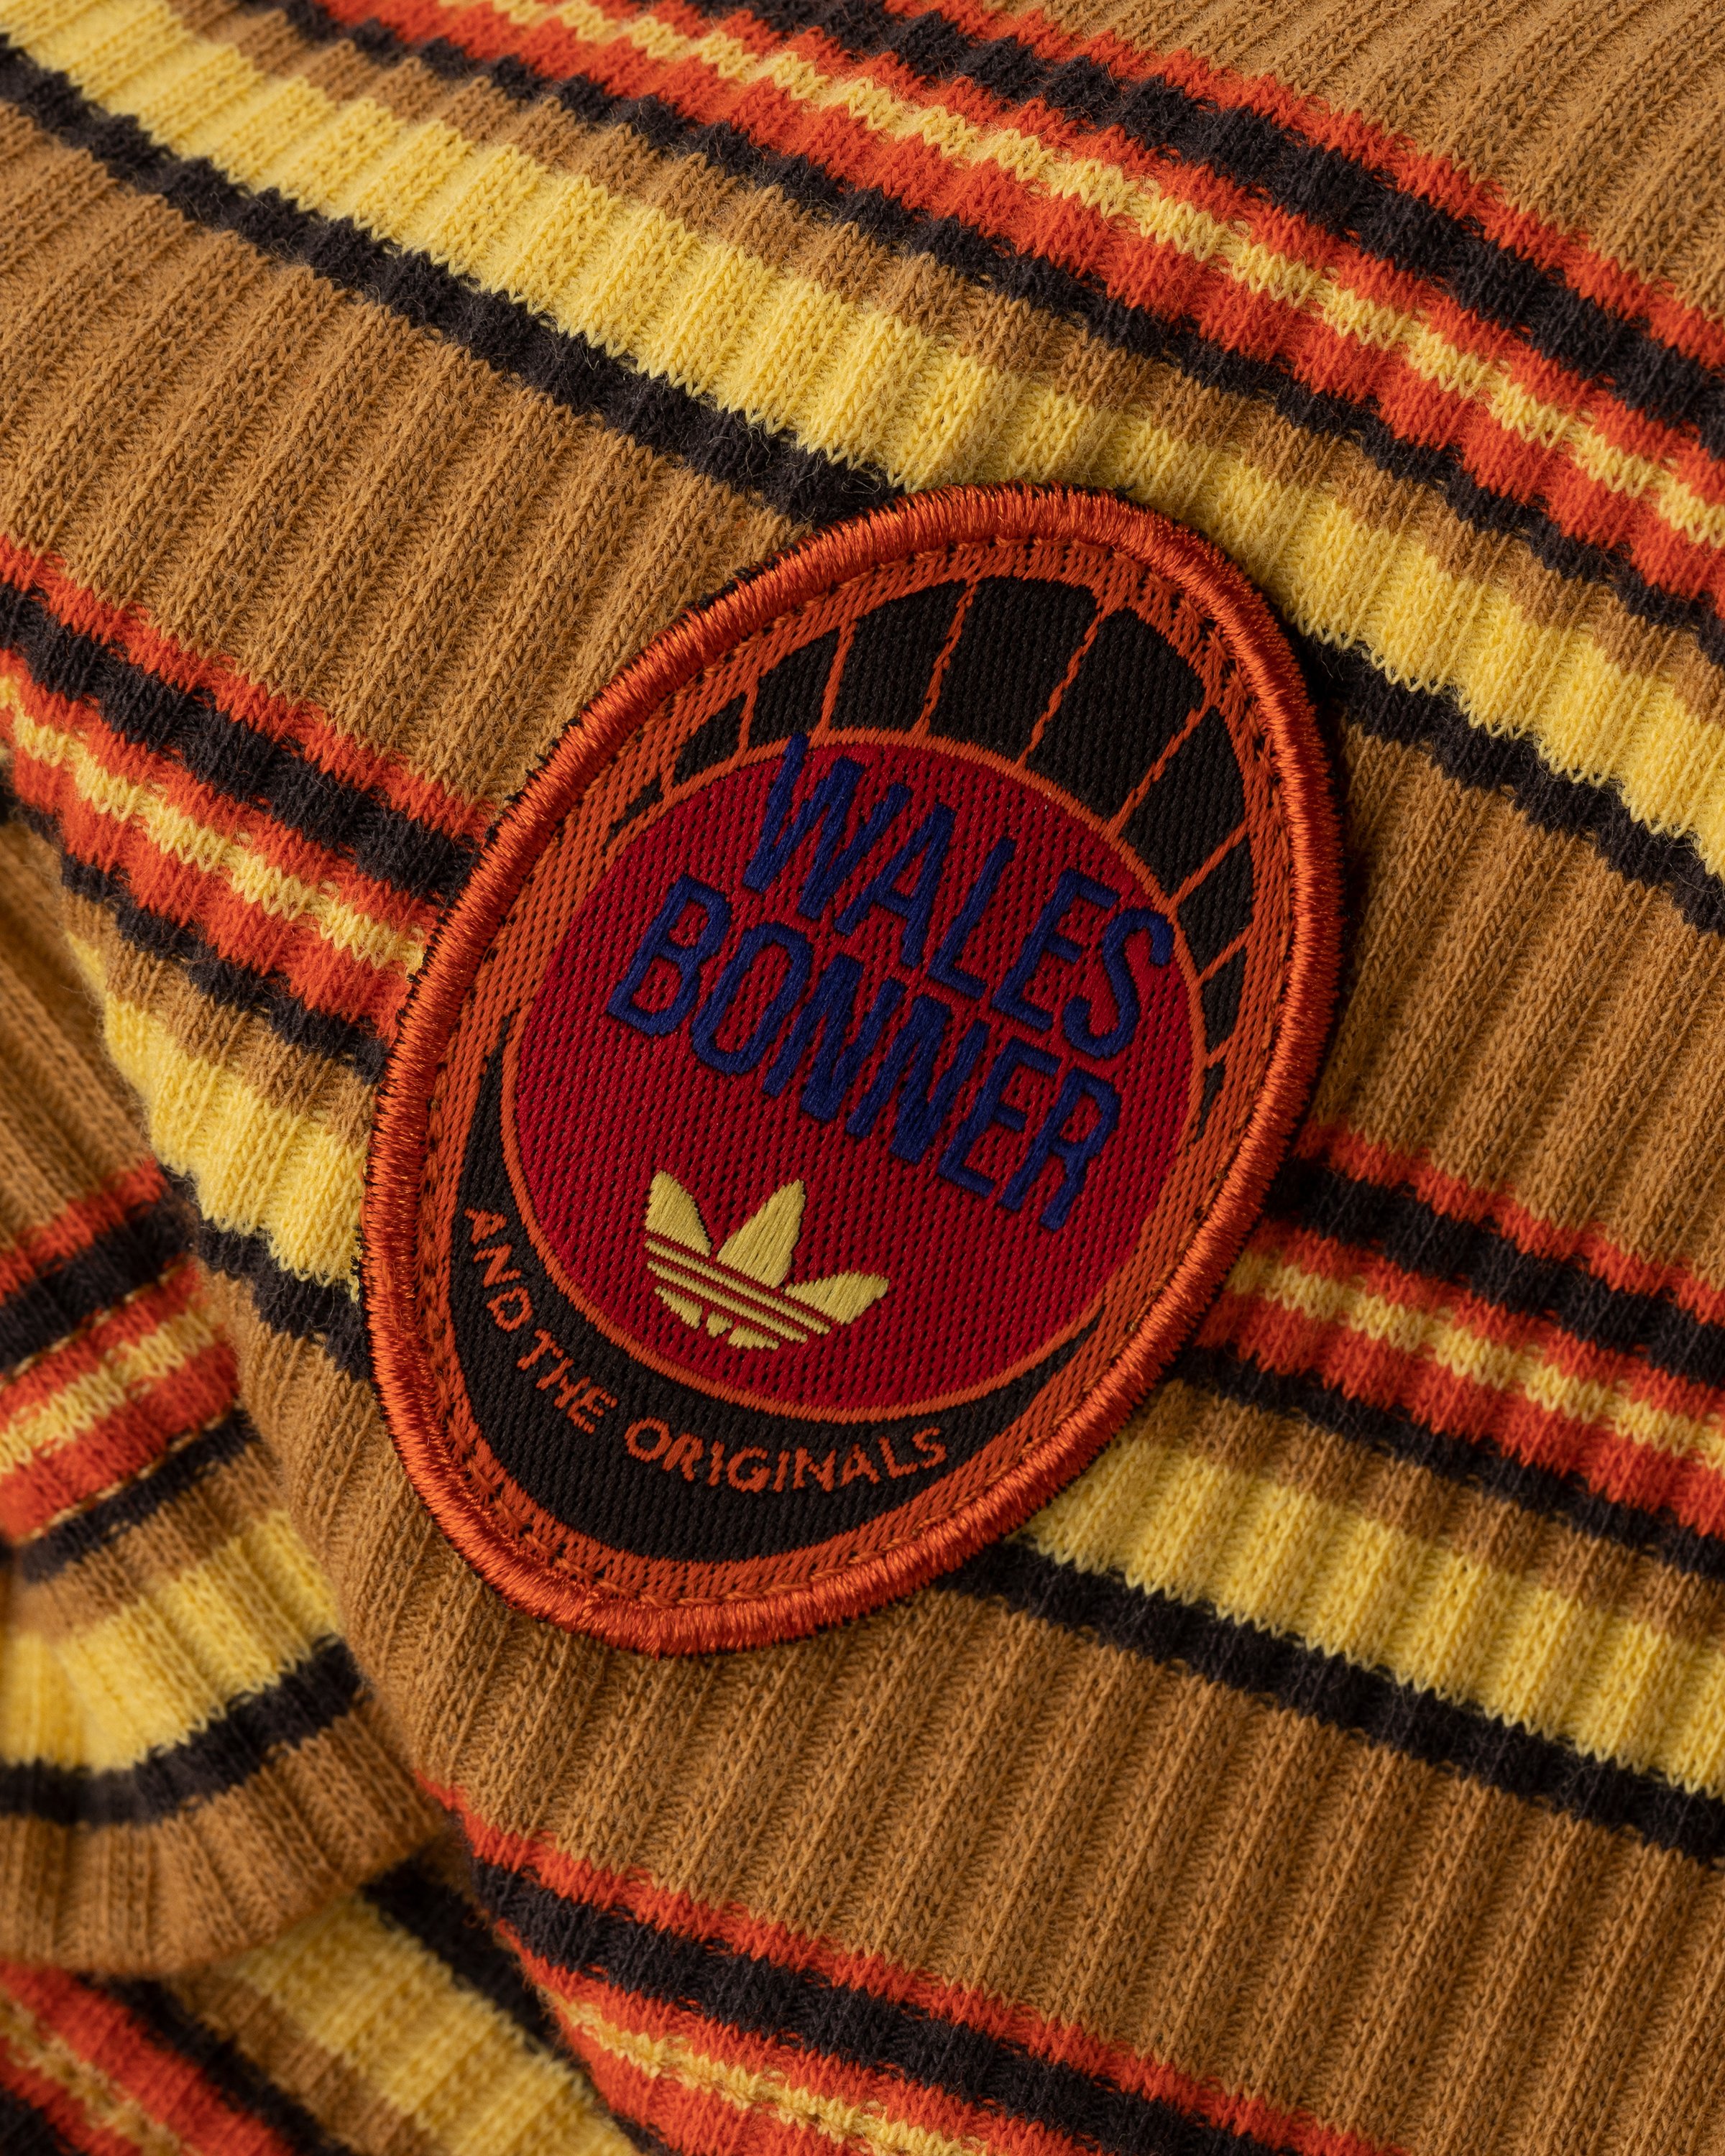 Adidas x Wales Bonner - WB Striped Longsleeve St Fade Gold/Scarlet - Clothing - Red - Image 3